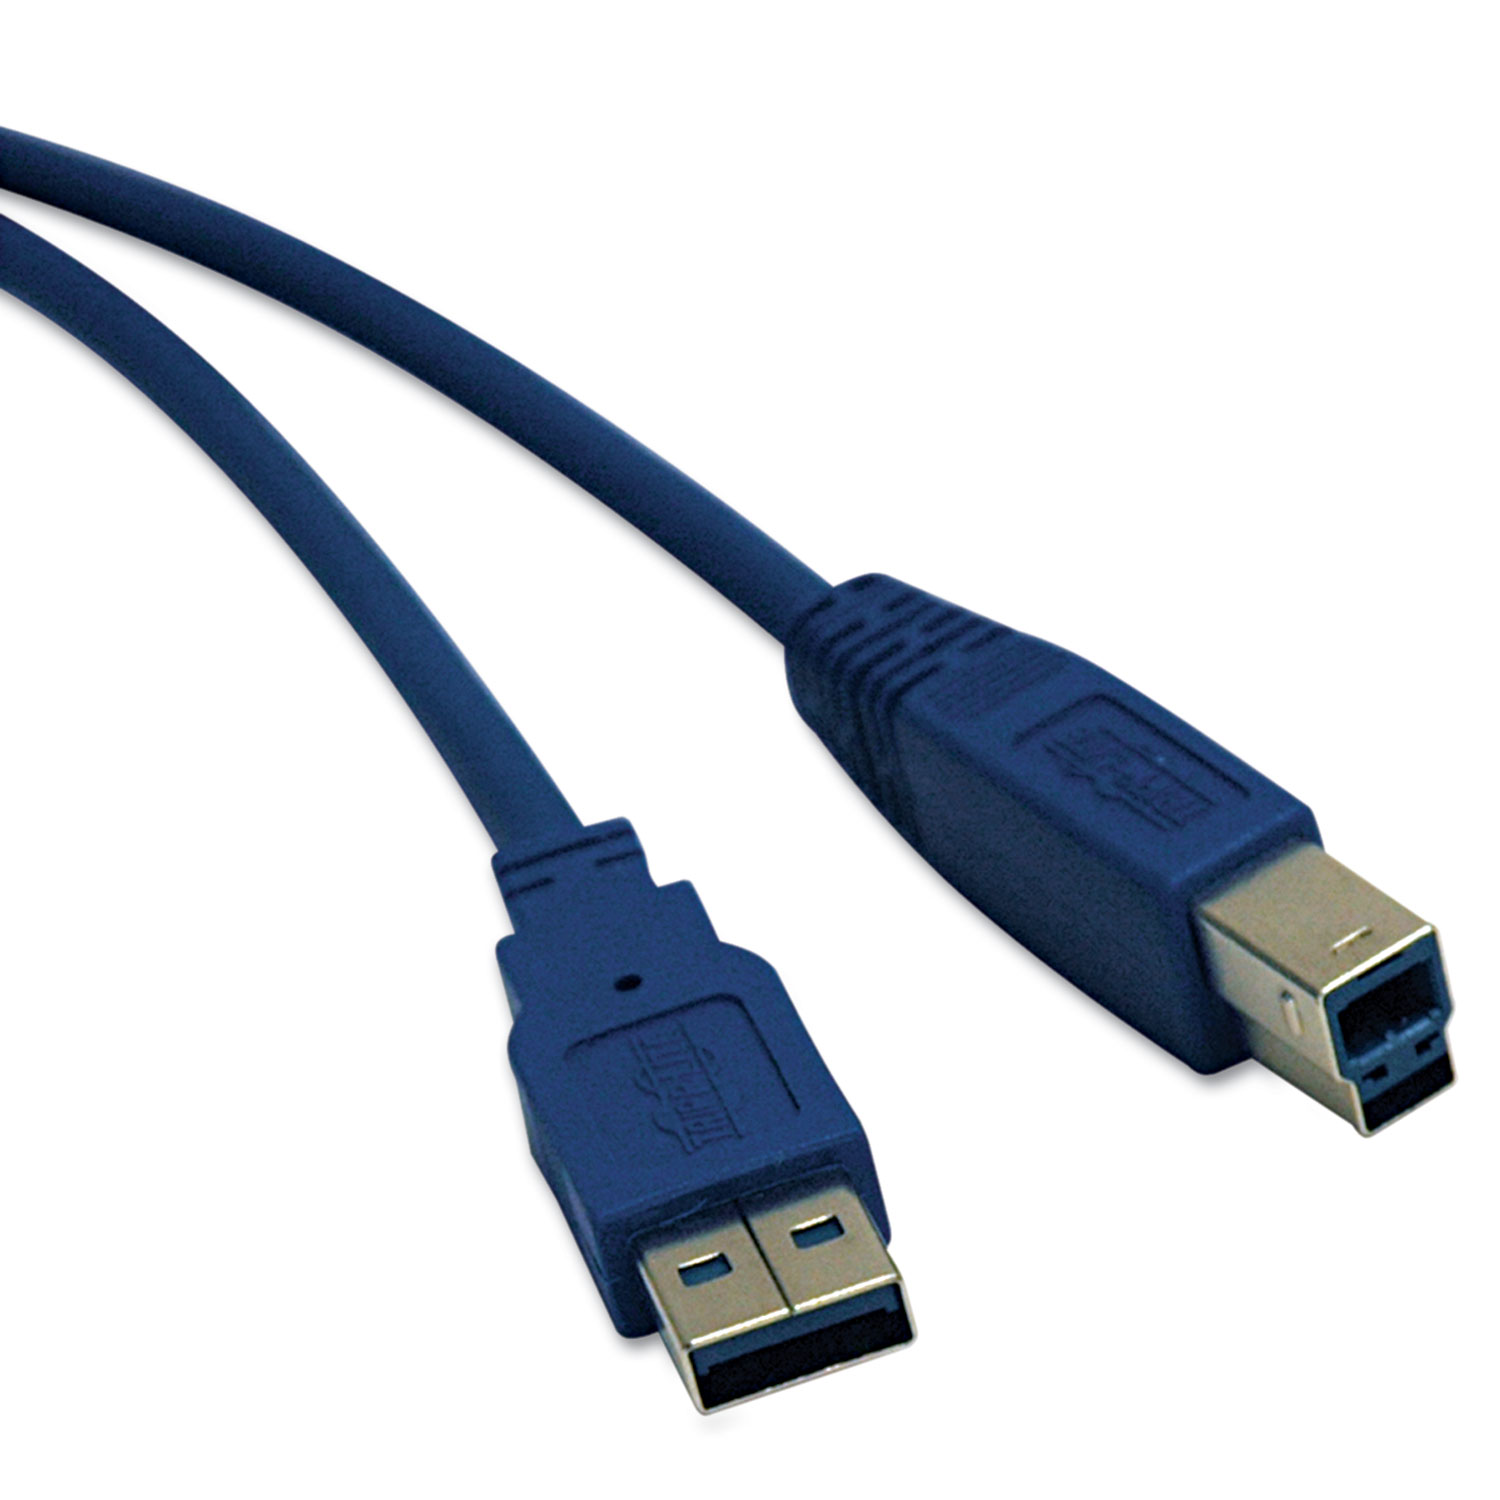 USB 3.0 Device Cable, 10 ft, Blue